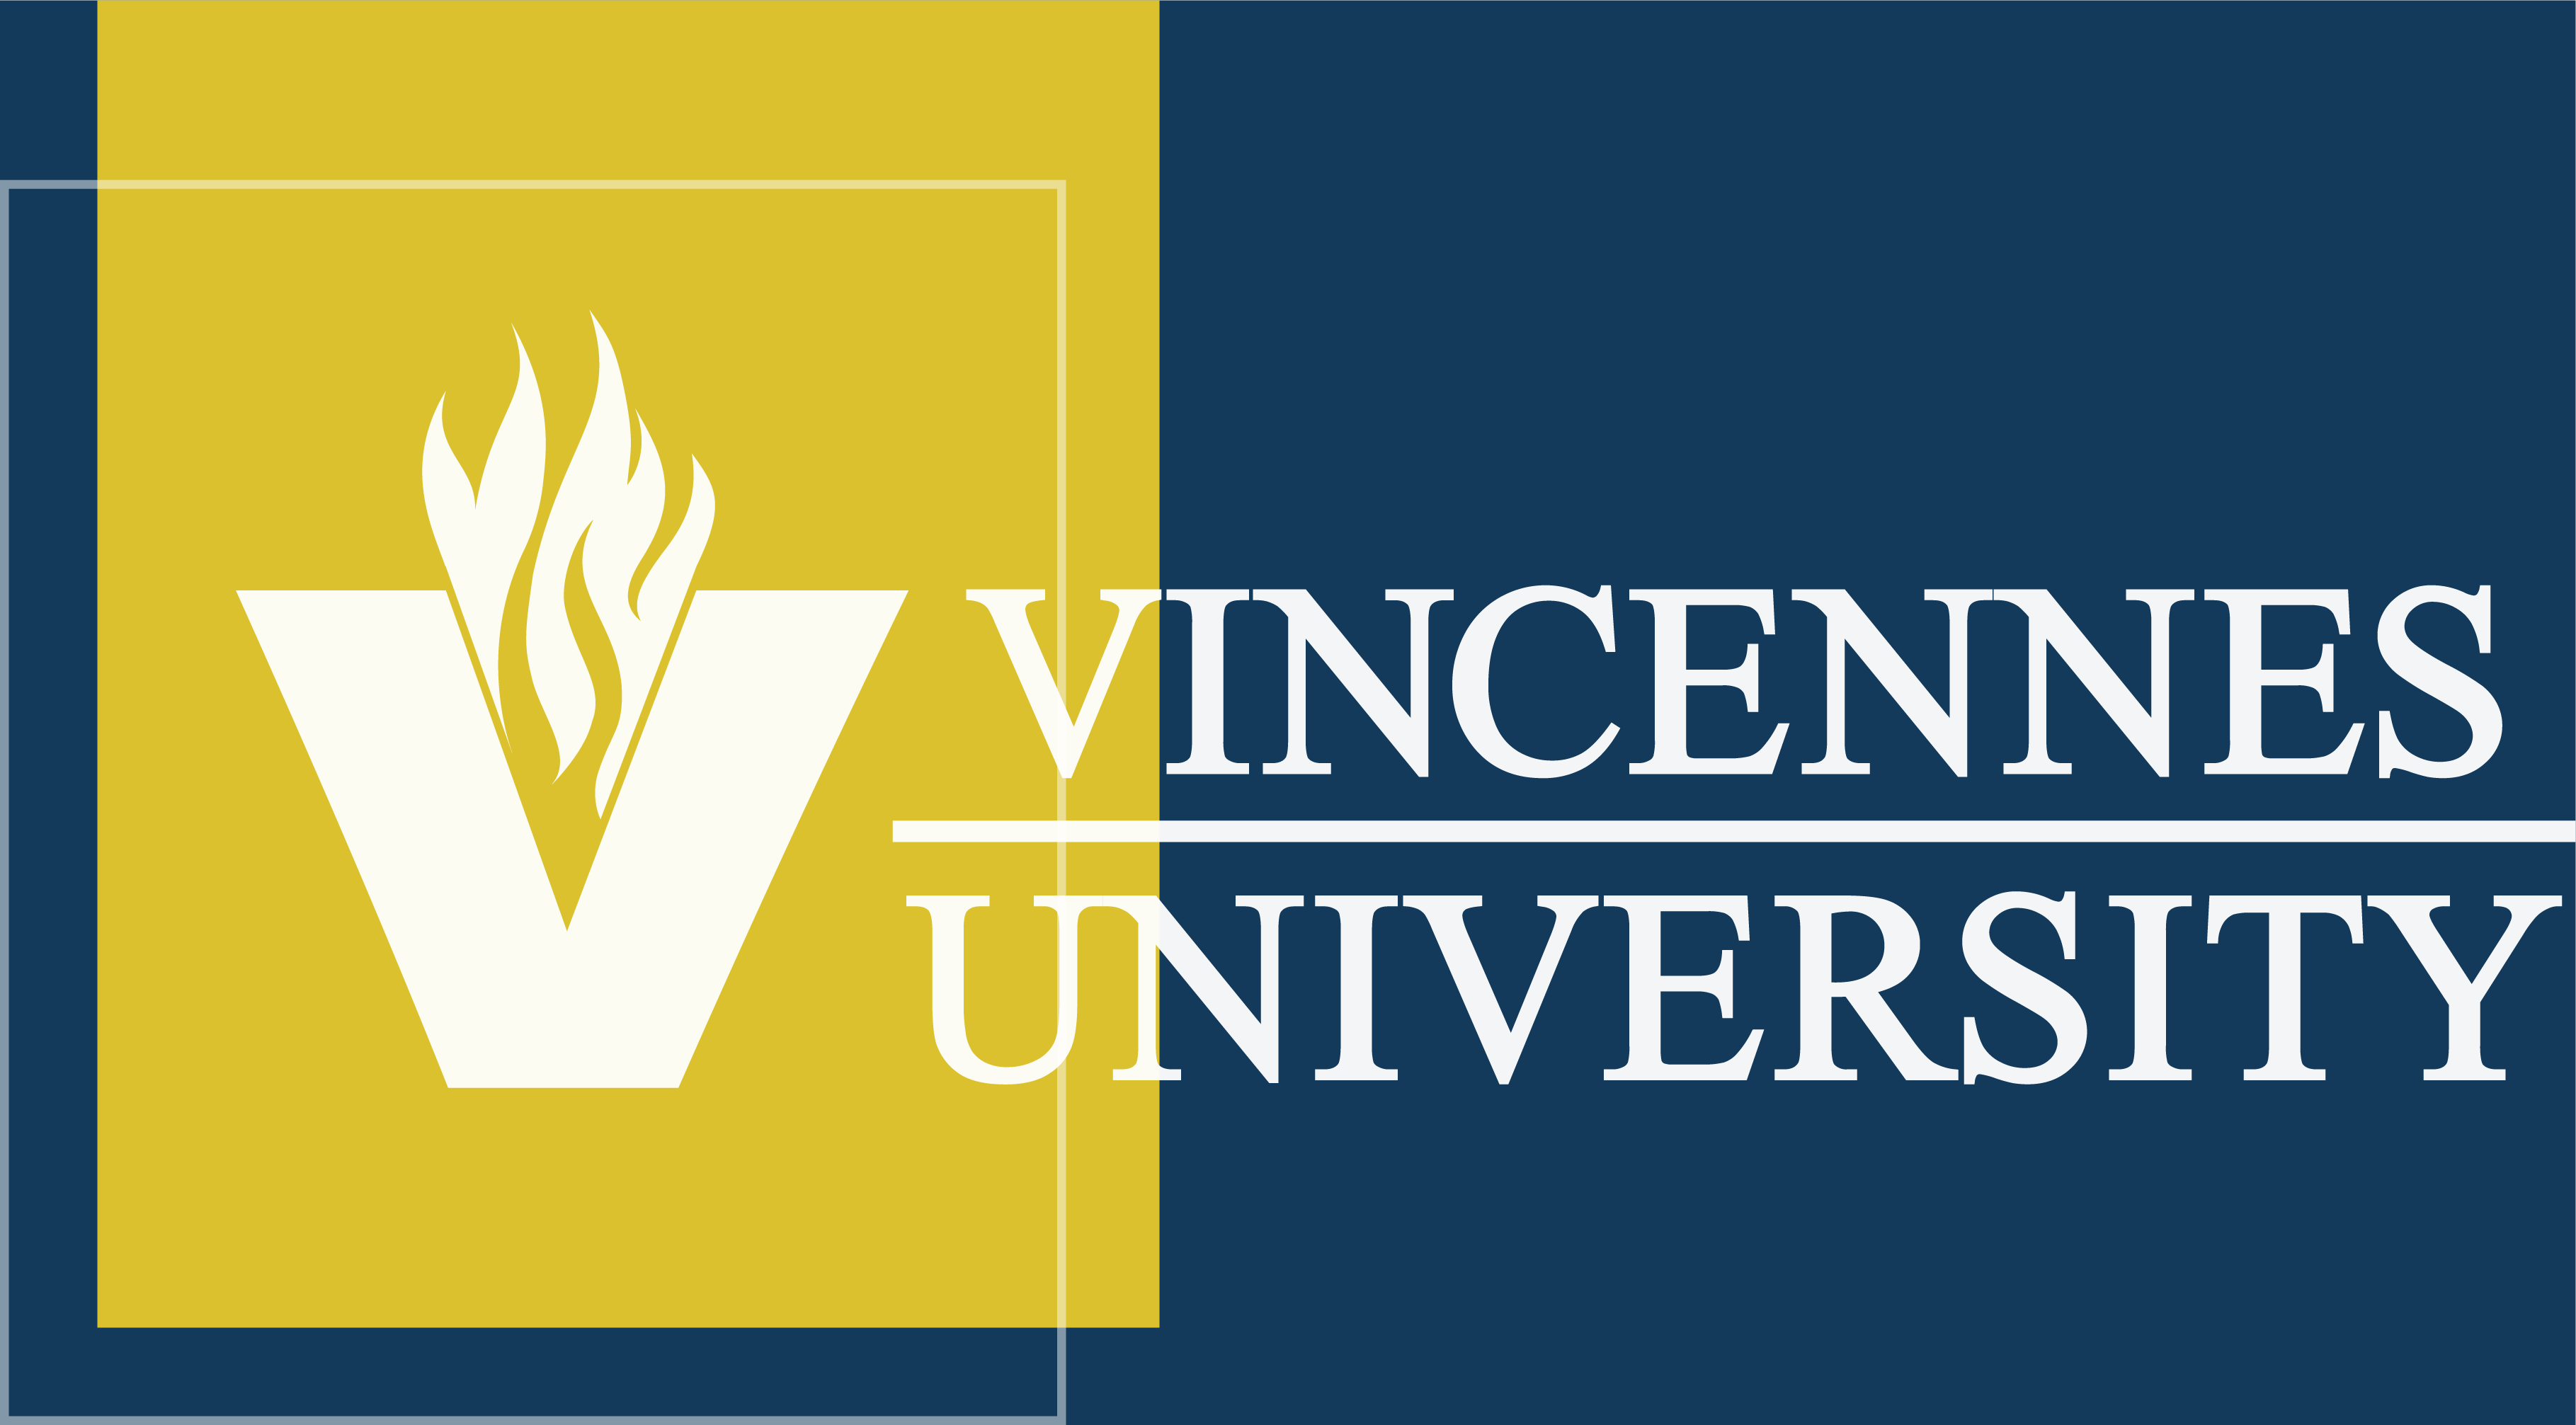 Vincennes University logo with blue, white and yellow colors